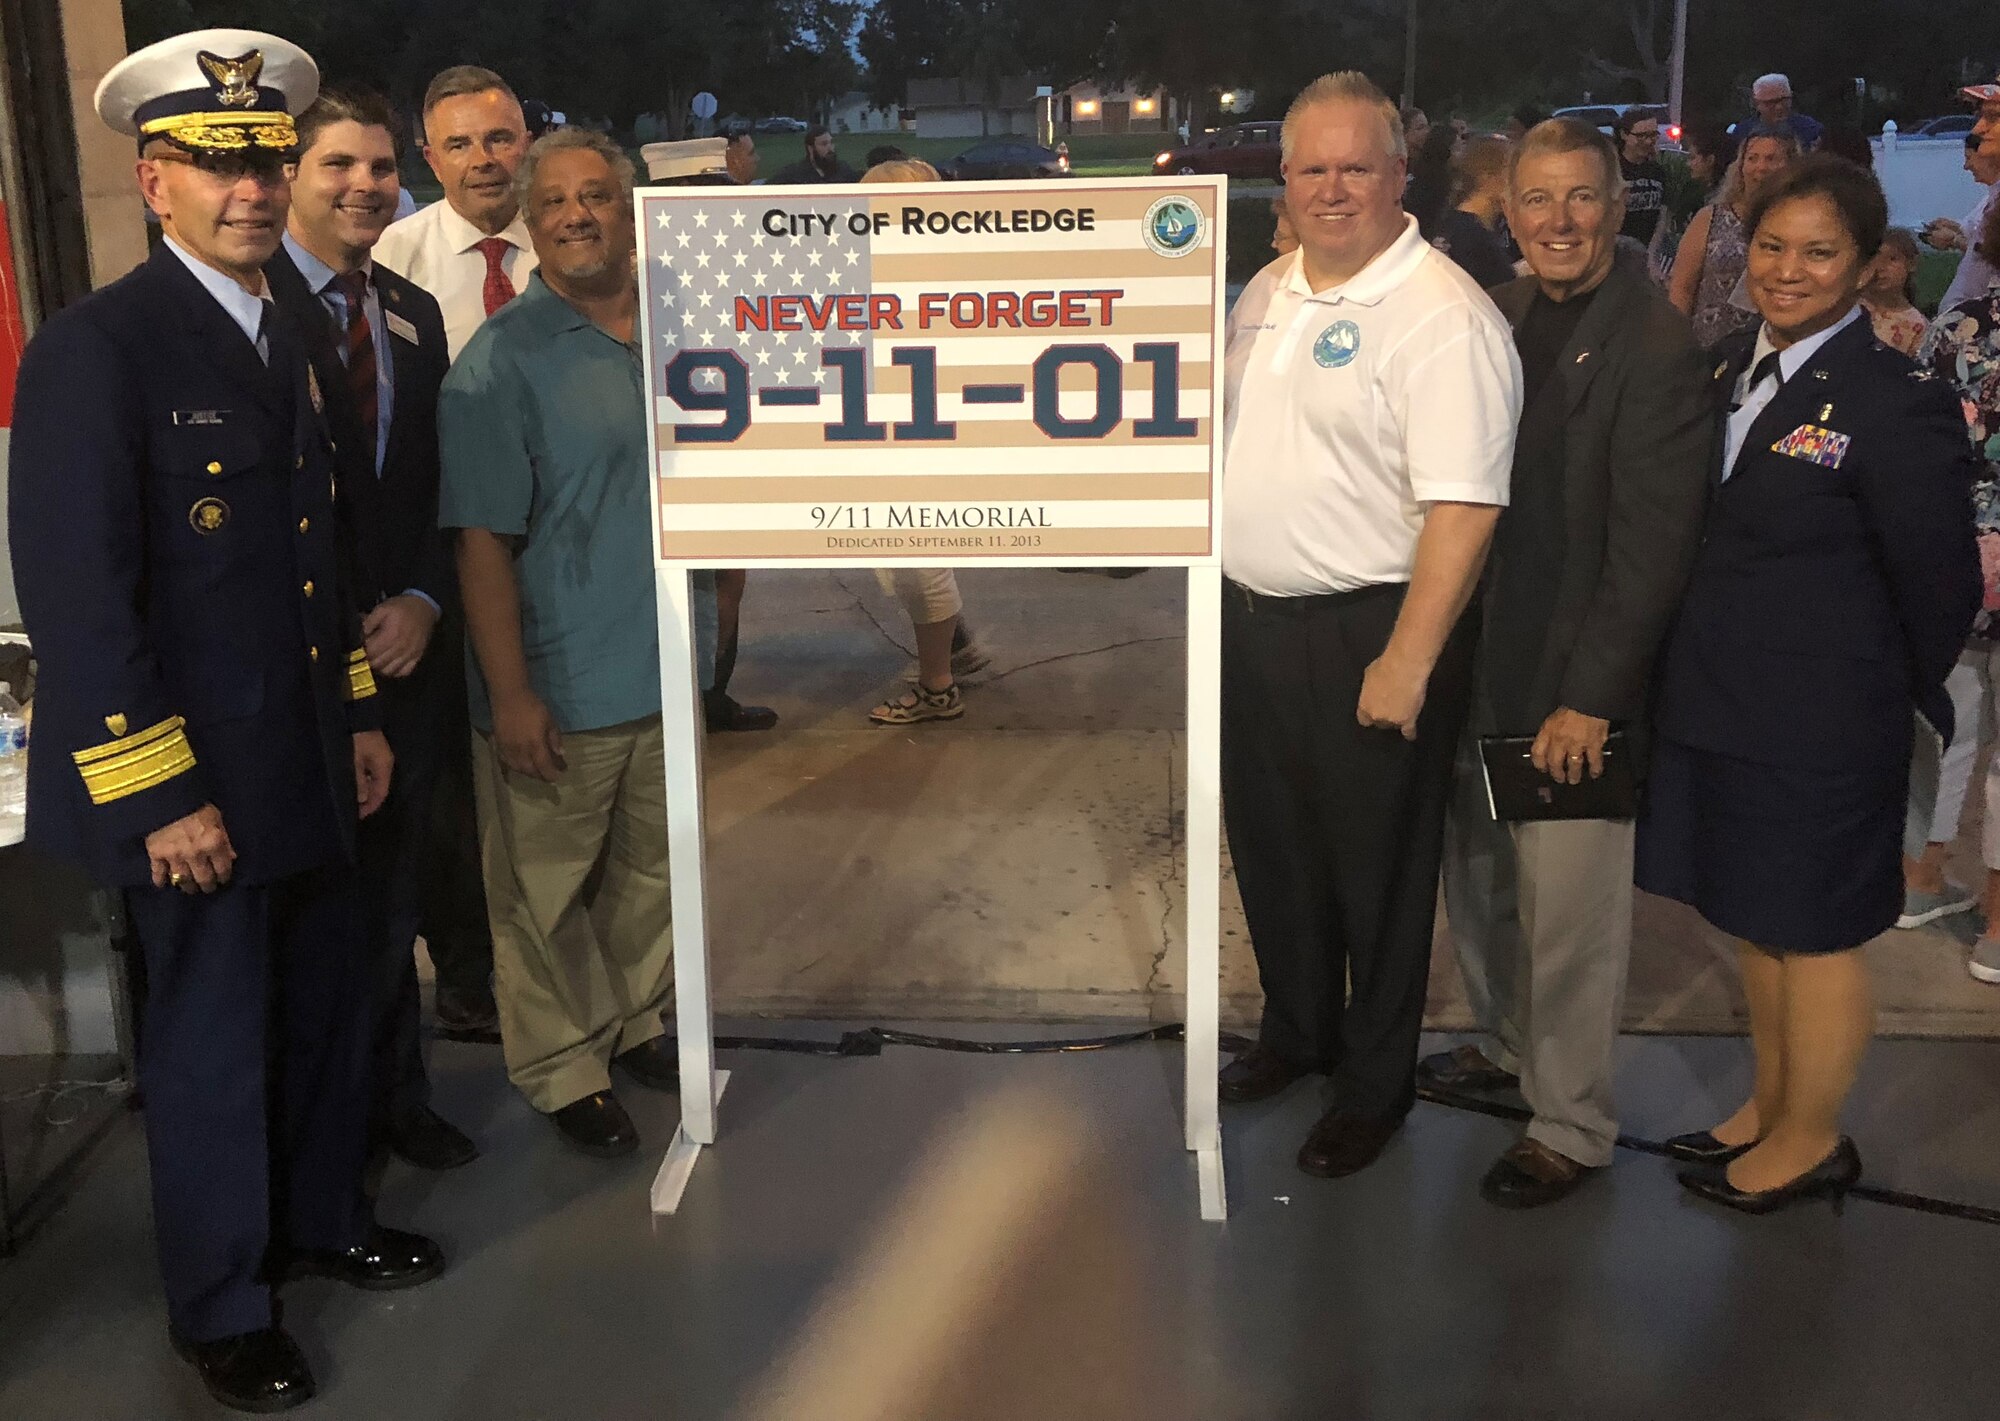 Guest speakers pose for a photo after unveiling a 9/11 dedication marker for the City of Rockledge, Florida, on Sept. 10, 2018, at the 3rd Annual 9/11 Remembrance Ceremony. Each speaker shared and recounted their memories of that day to an audience of nearly 250 guests. (U.S. Air Force photo/Heidi Hunt)